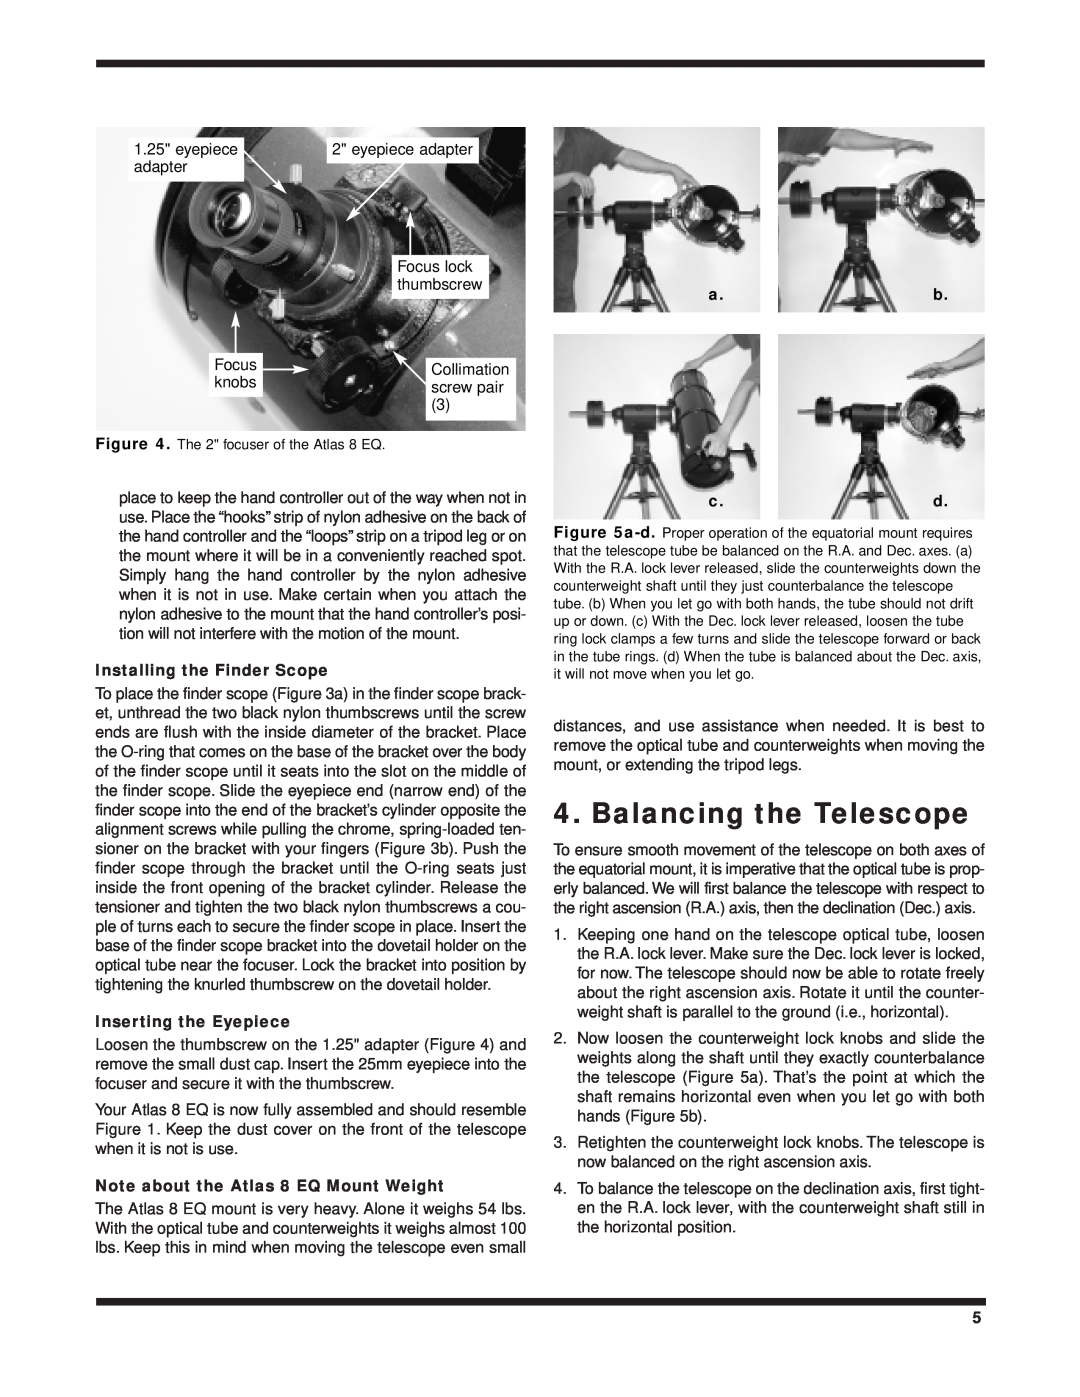 Orion 8 EQ instruction manual Balancing the Telescope, Installing the Finder Scope, Inserting the Eyepiece, a.b c.d 